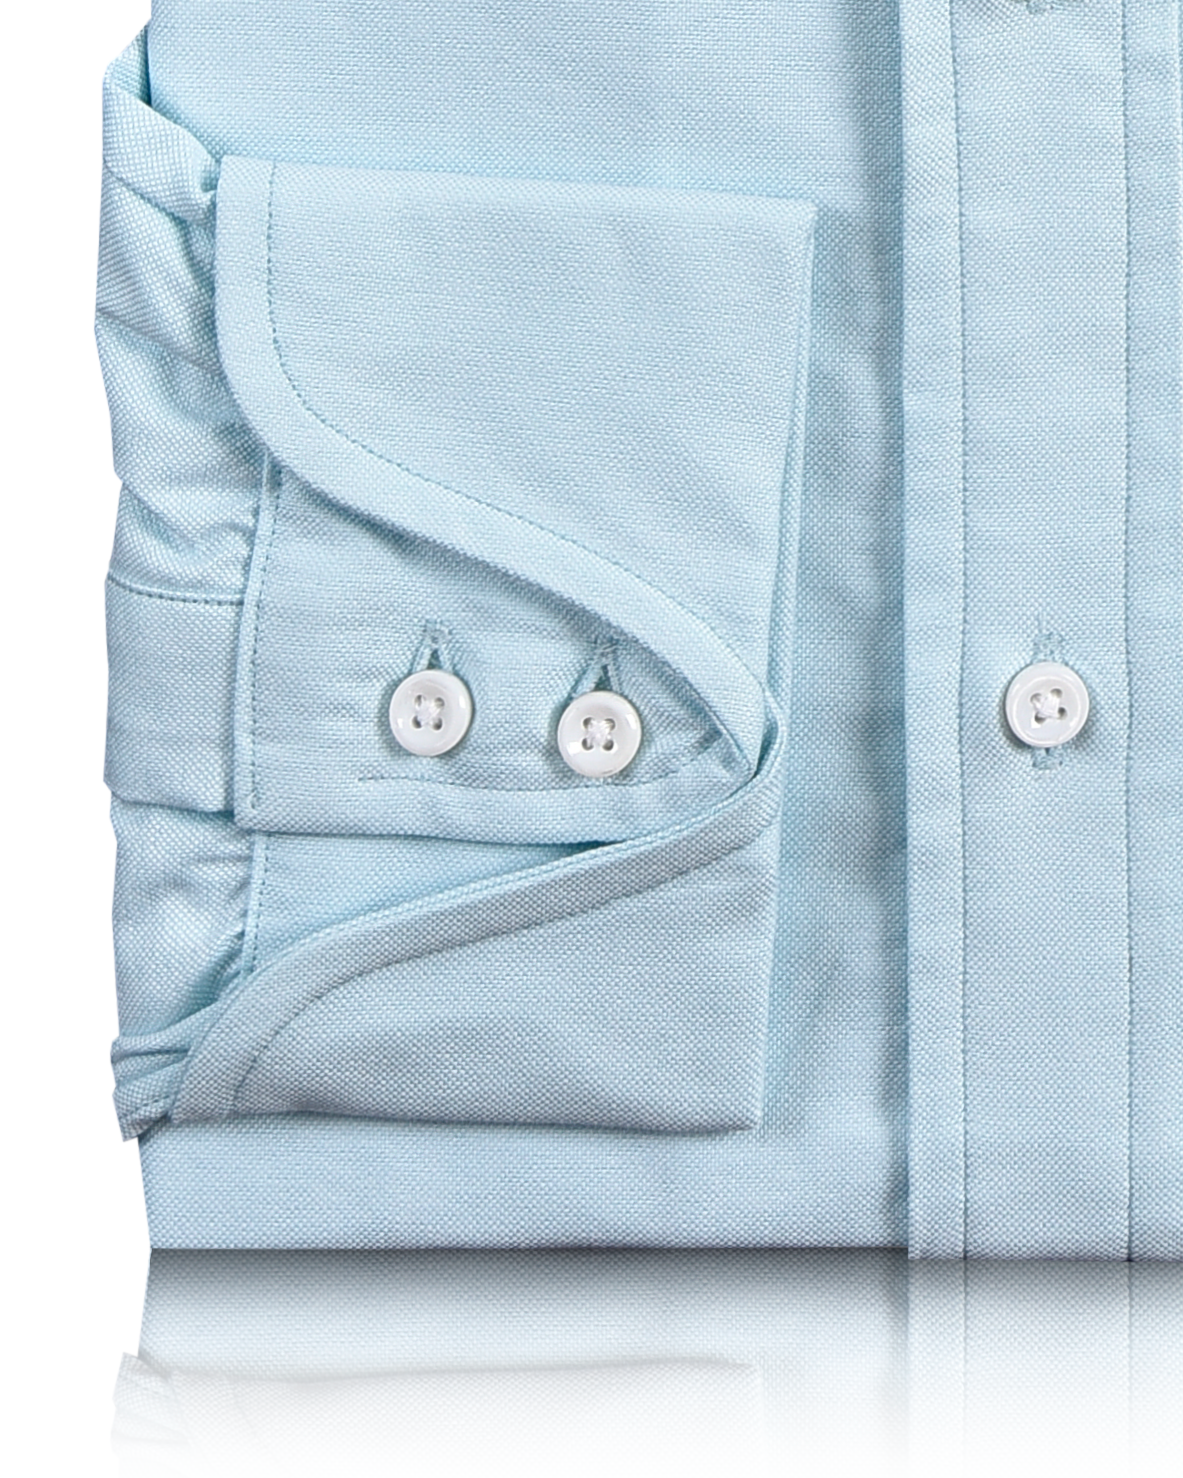 Cuff of the custom oxford shirt for men by Luxire in pale blue